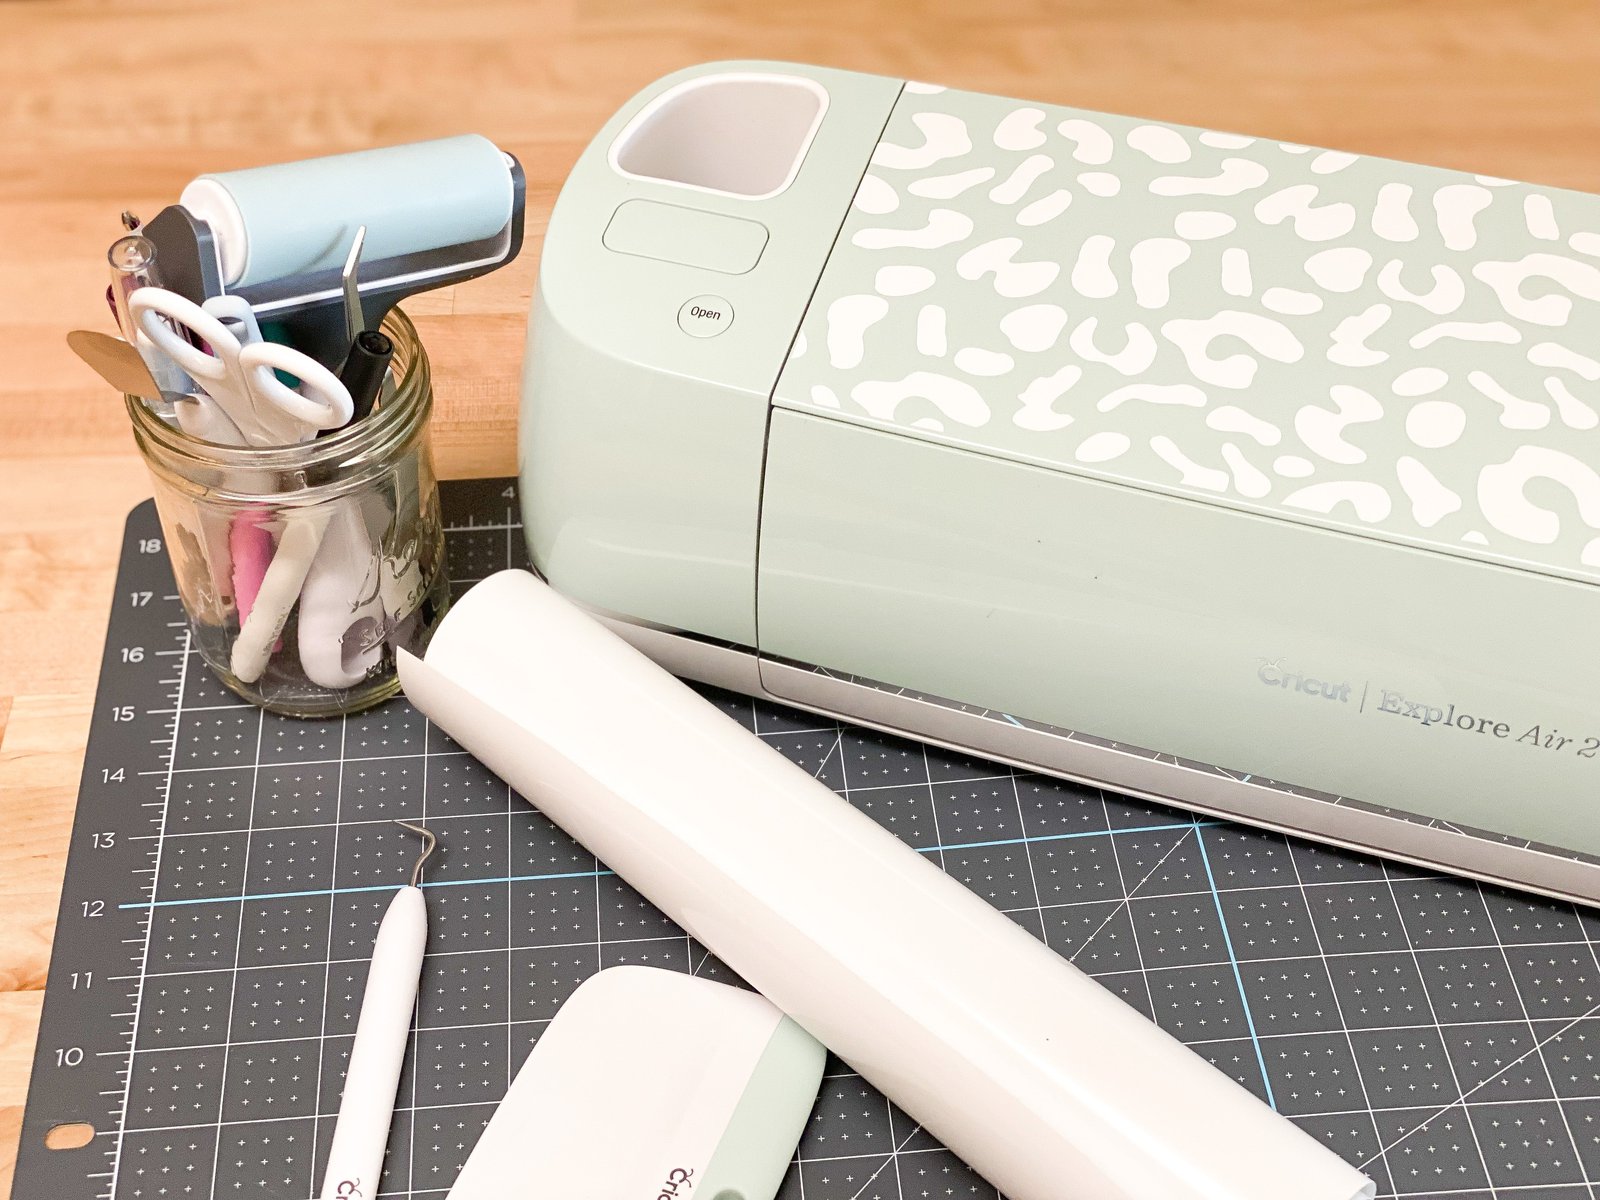 How to Decorate Explore Air 2 with Cricut Vinyl